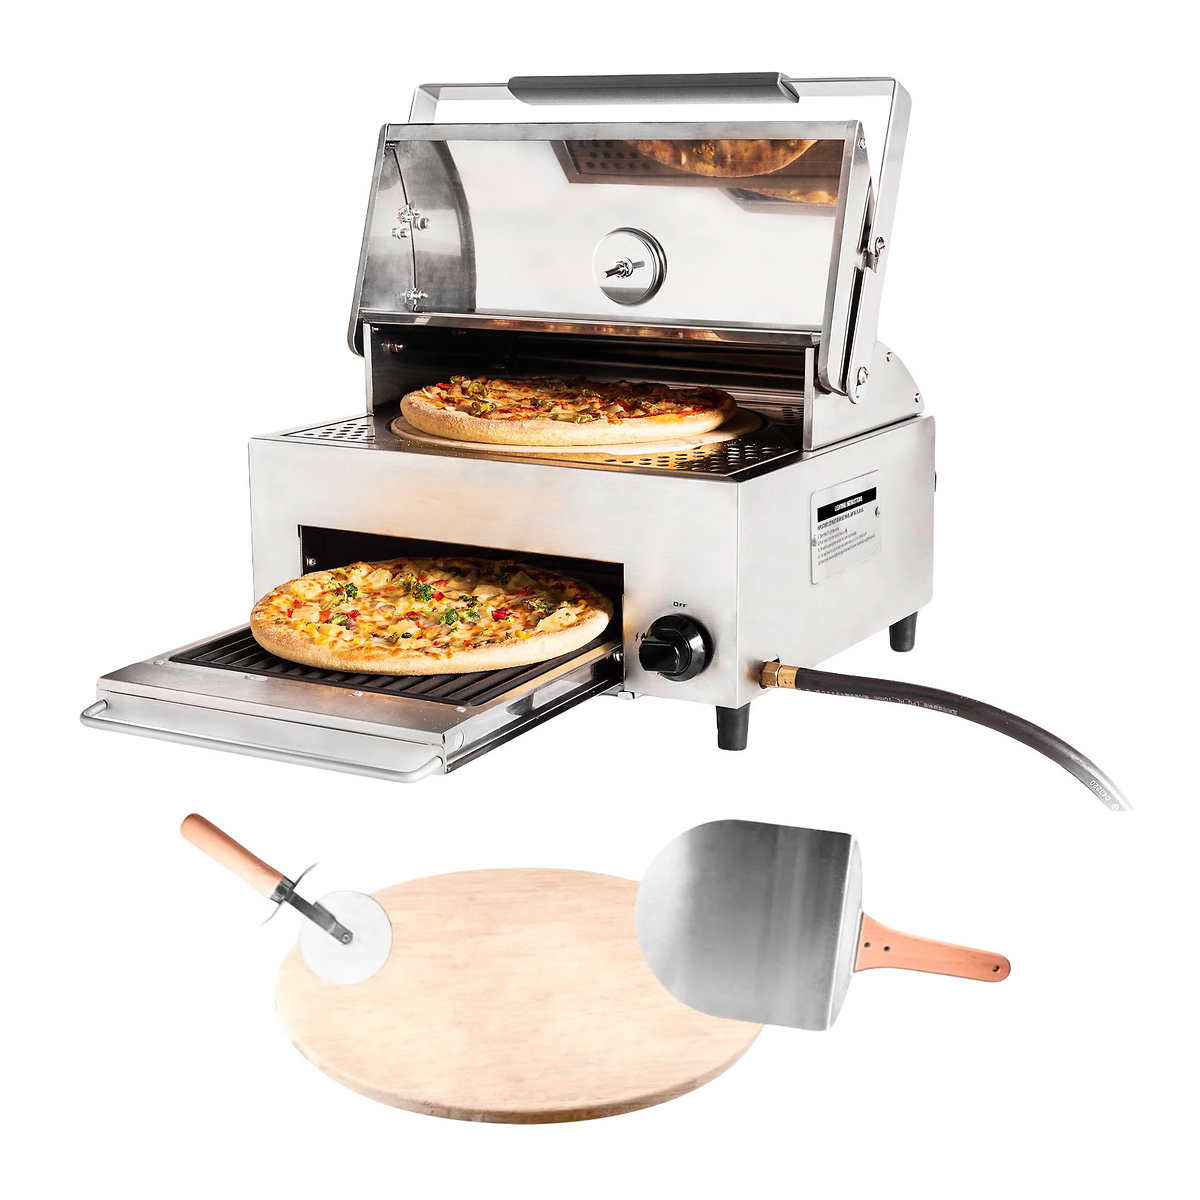 43 Portable Cooking Devices